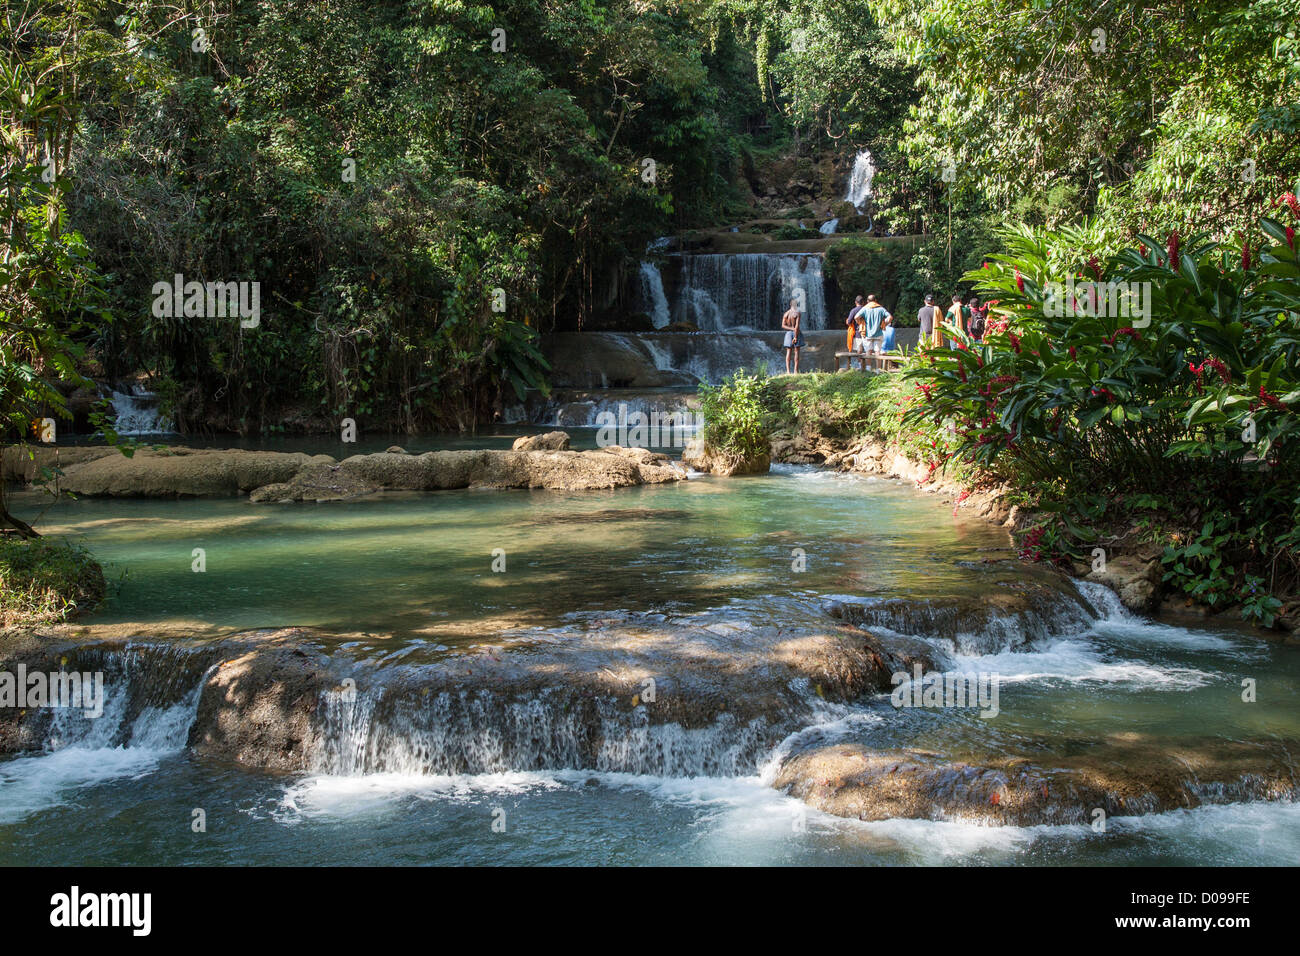 TOURISTS IN THE CASCADES OF YS FALLS REGION OF THE BLACK RIVER JAMAICA ...